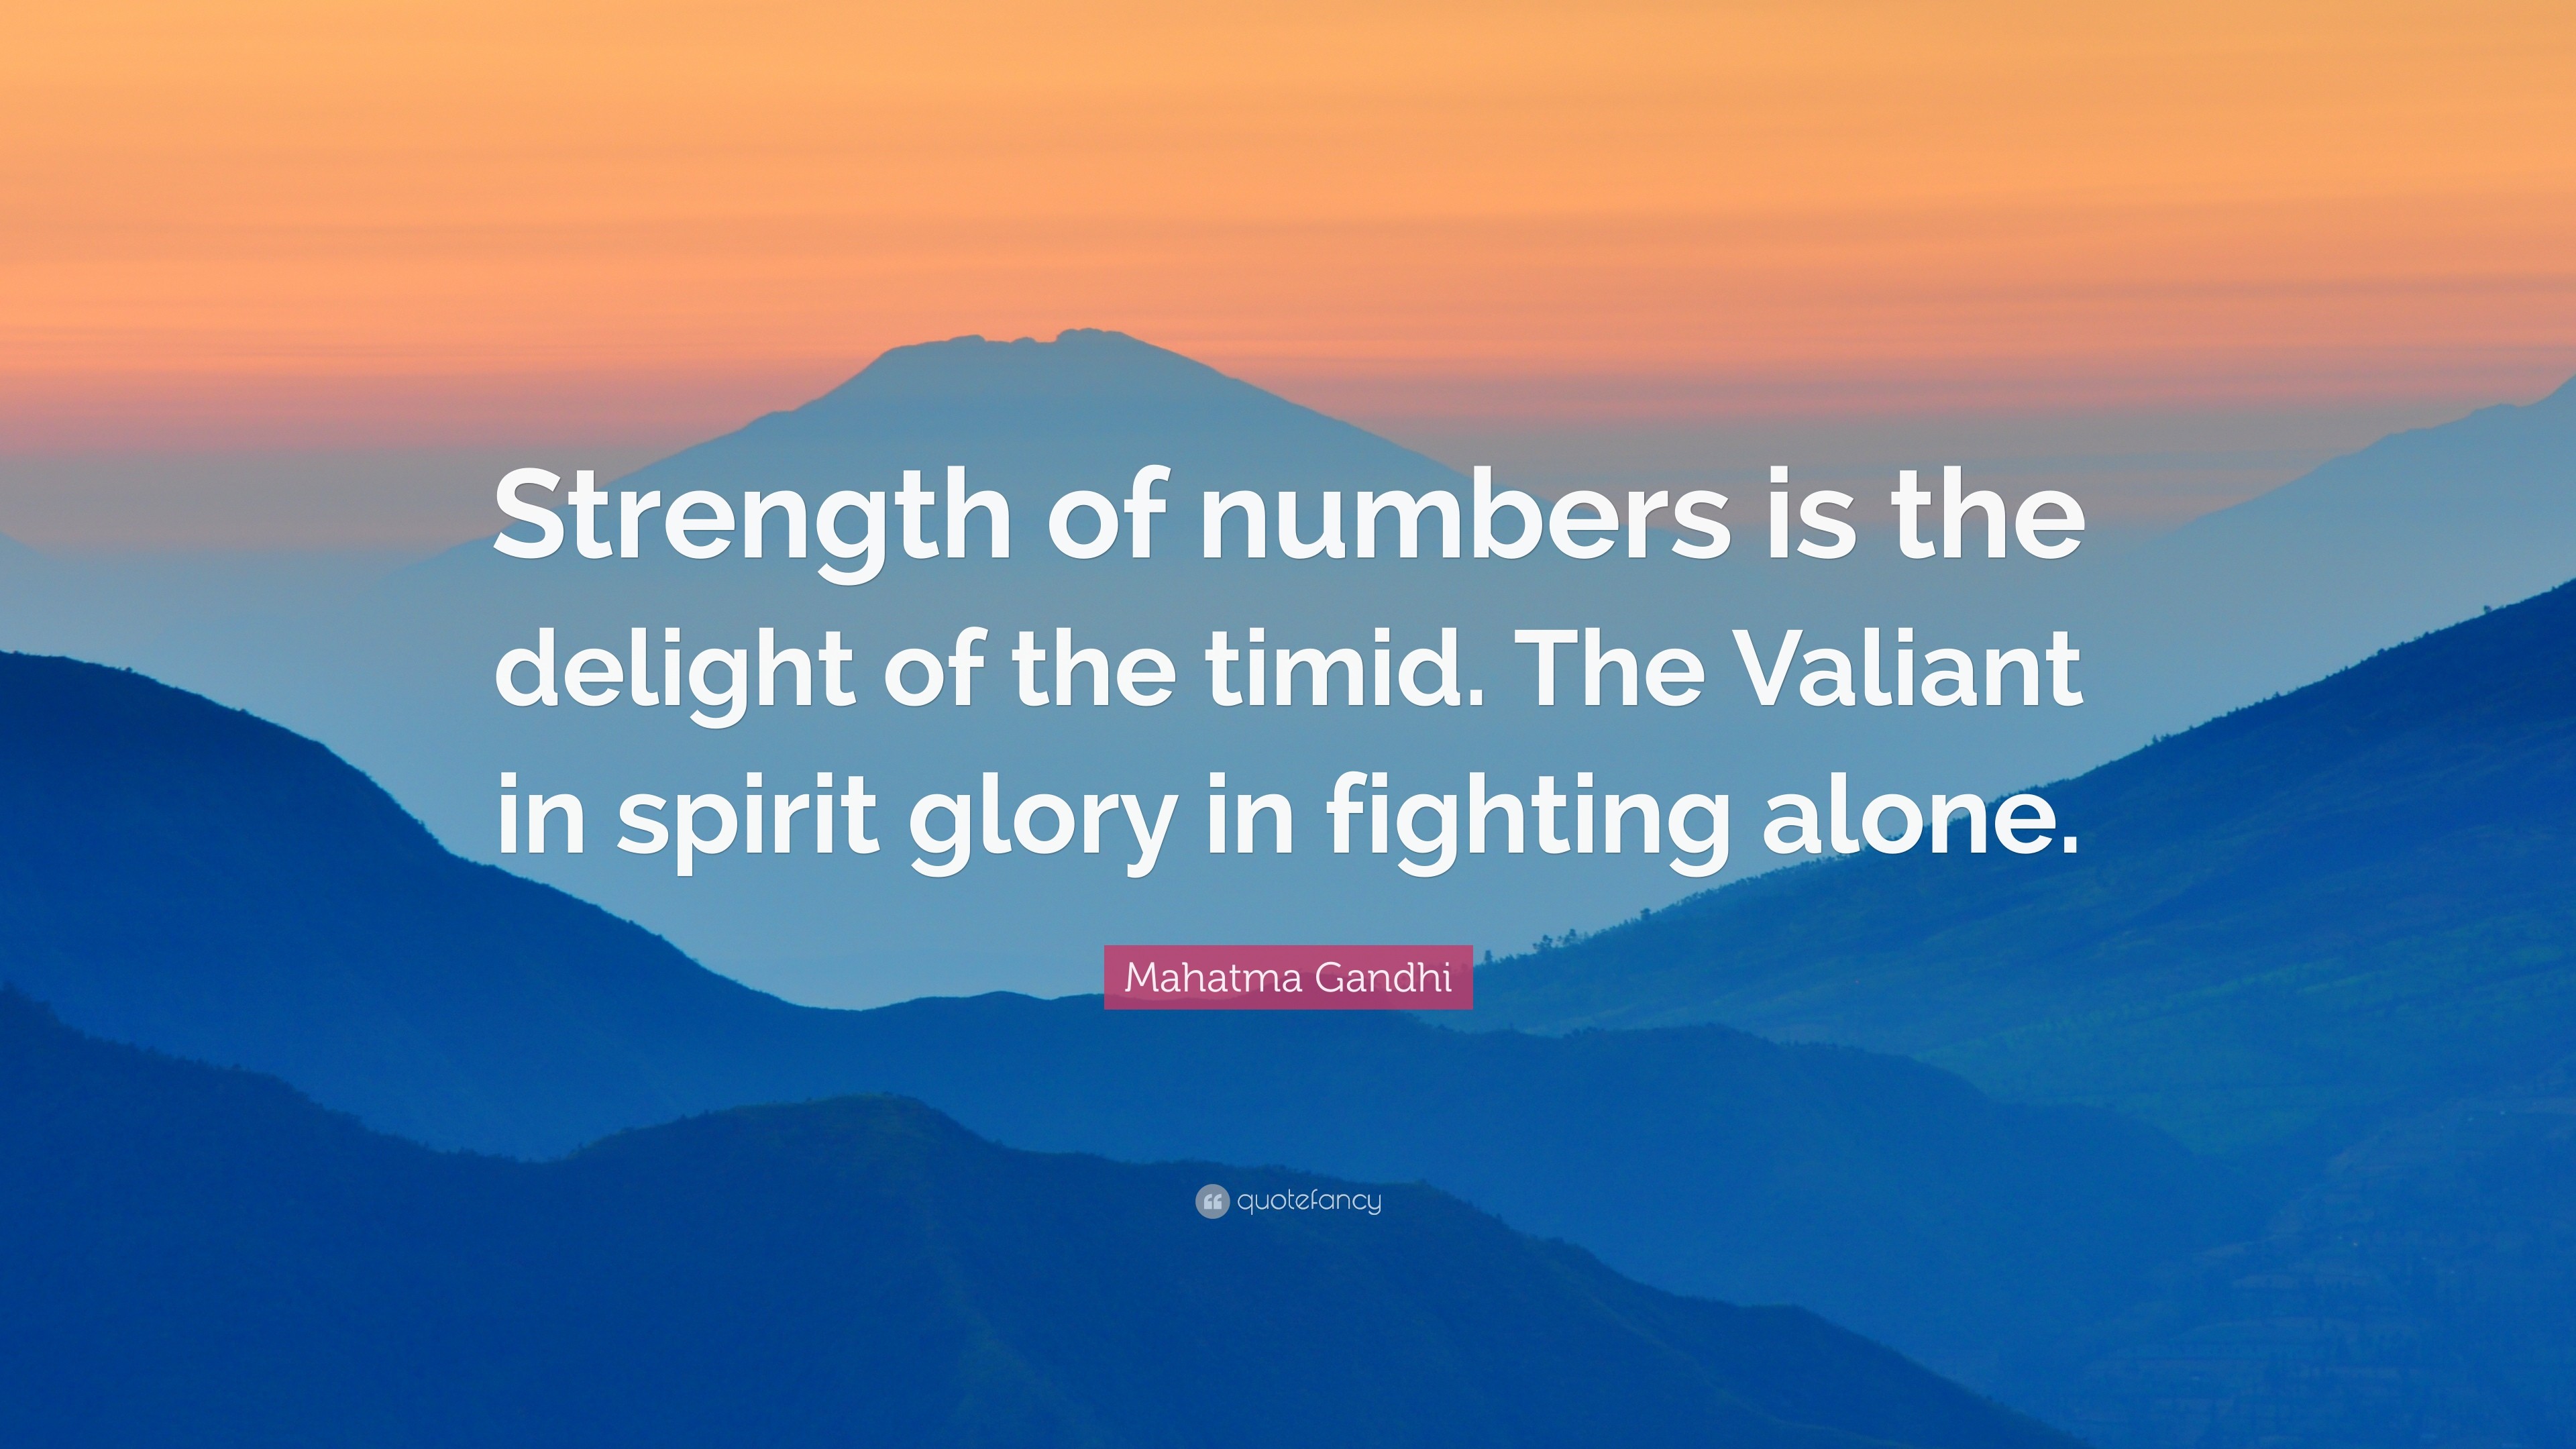 3840x2160 Mahatma Gandhi Quote: “Strength of numbers is the delight of the timid. The